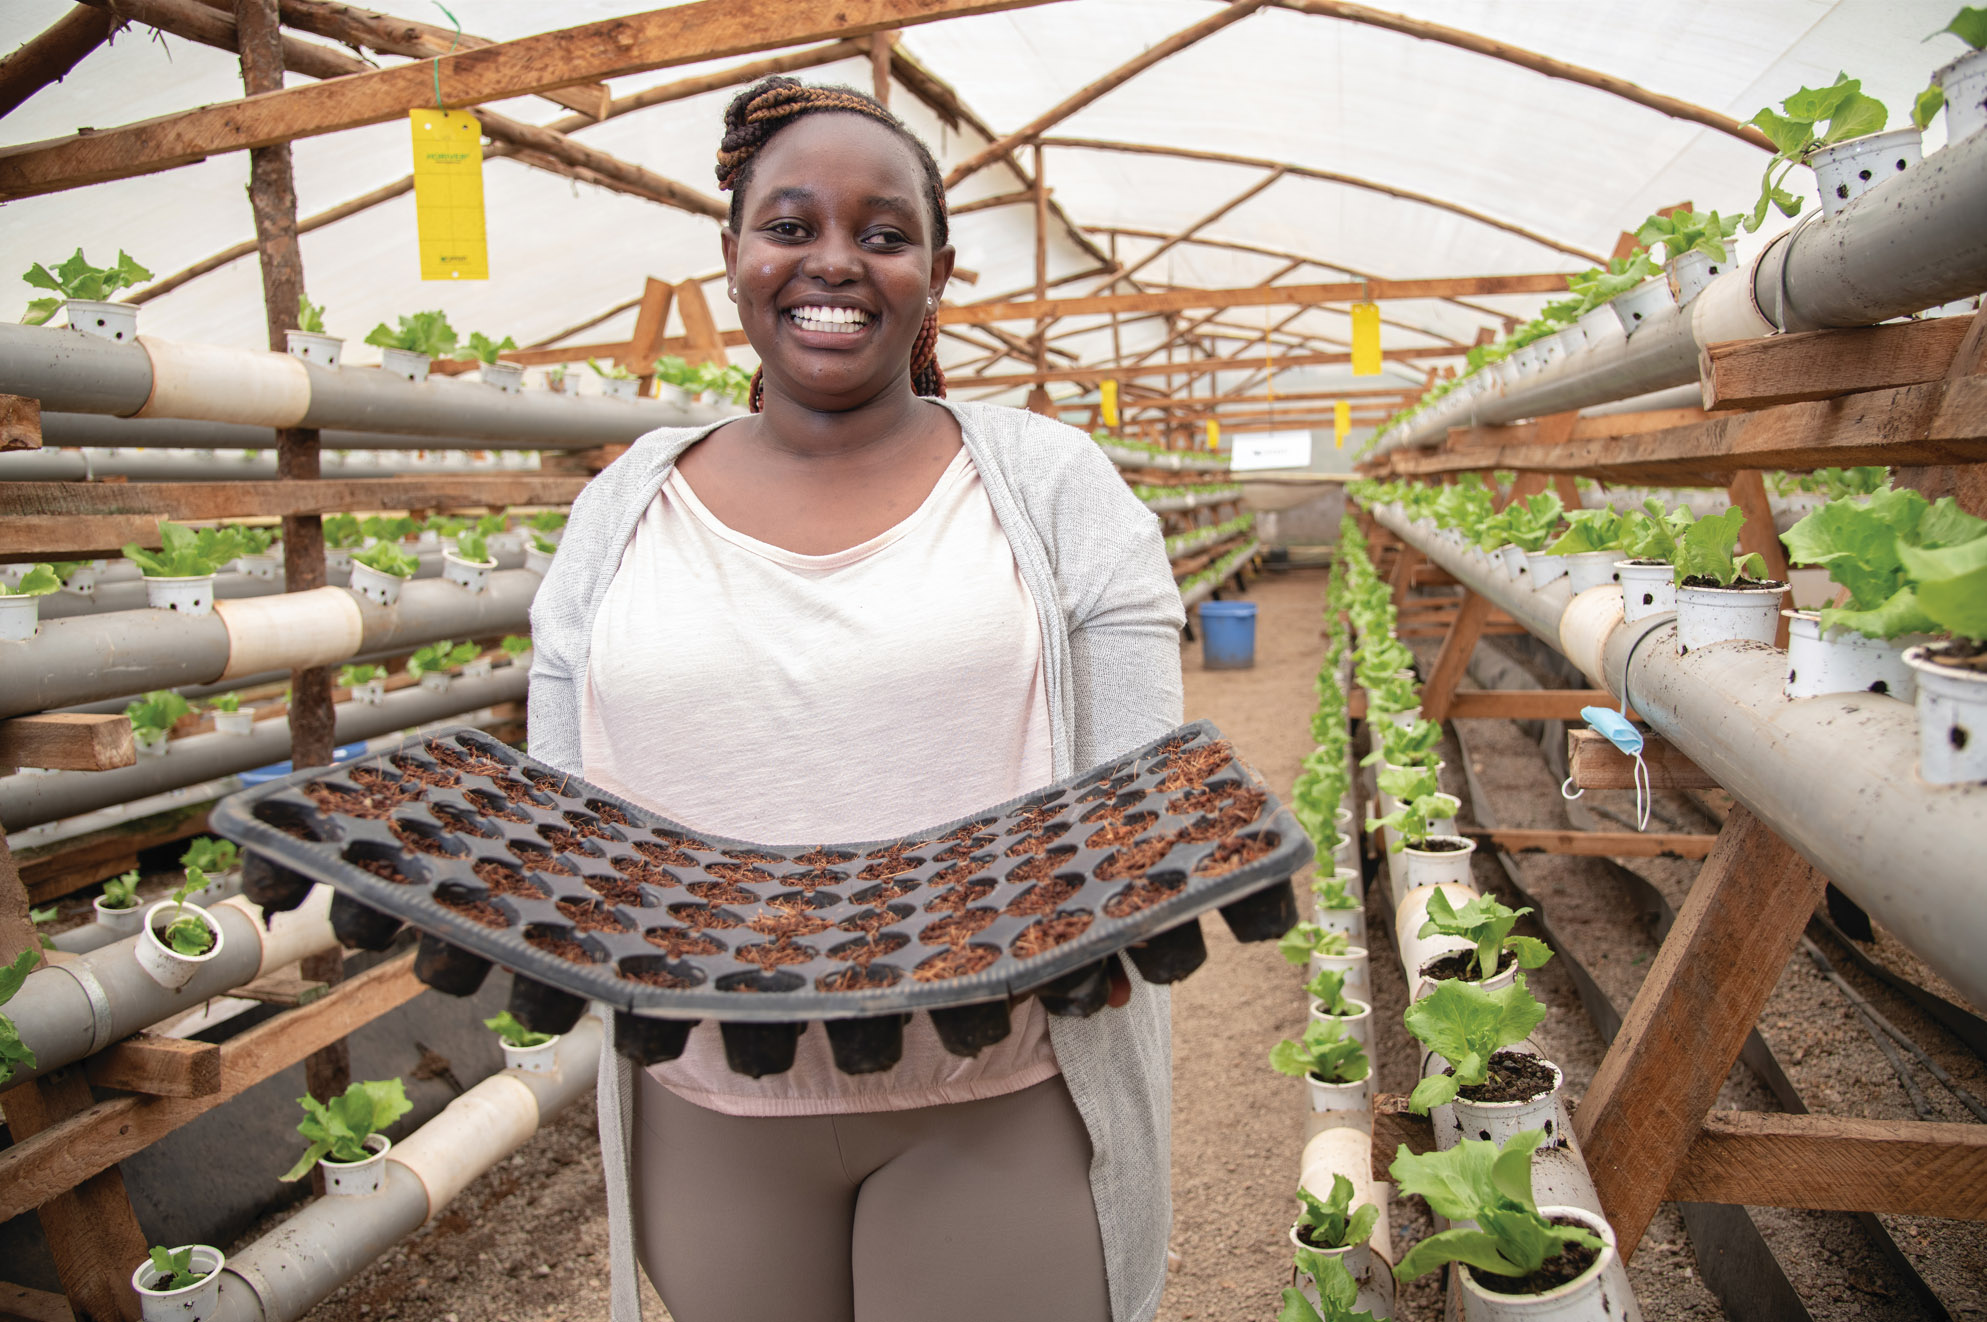 A smiling woman holding seedlings